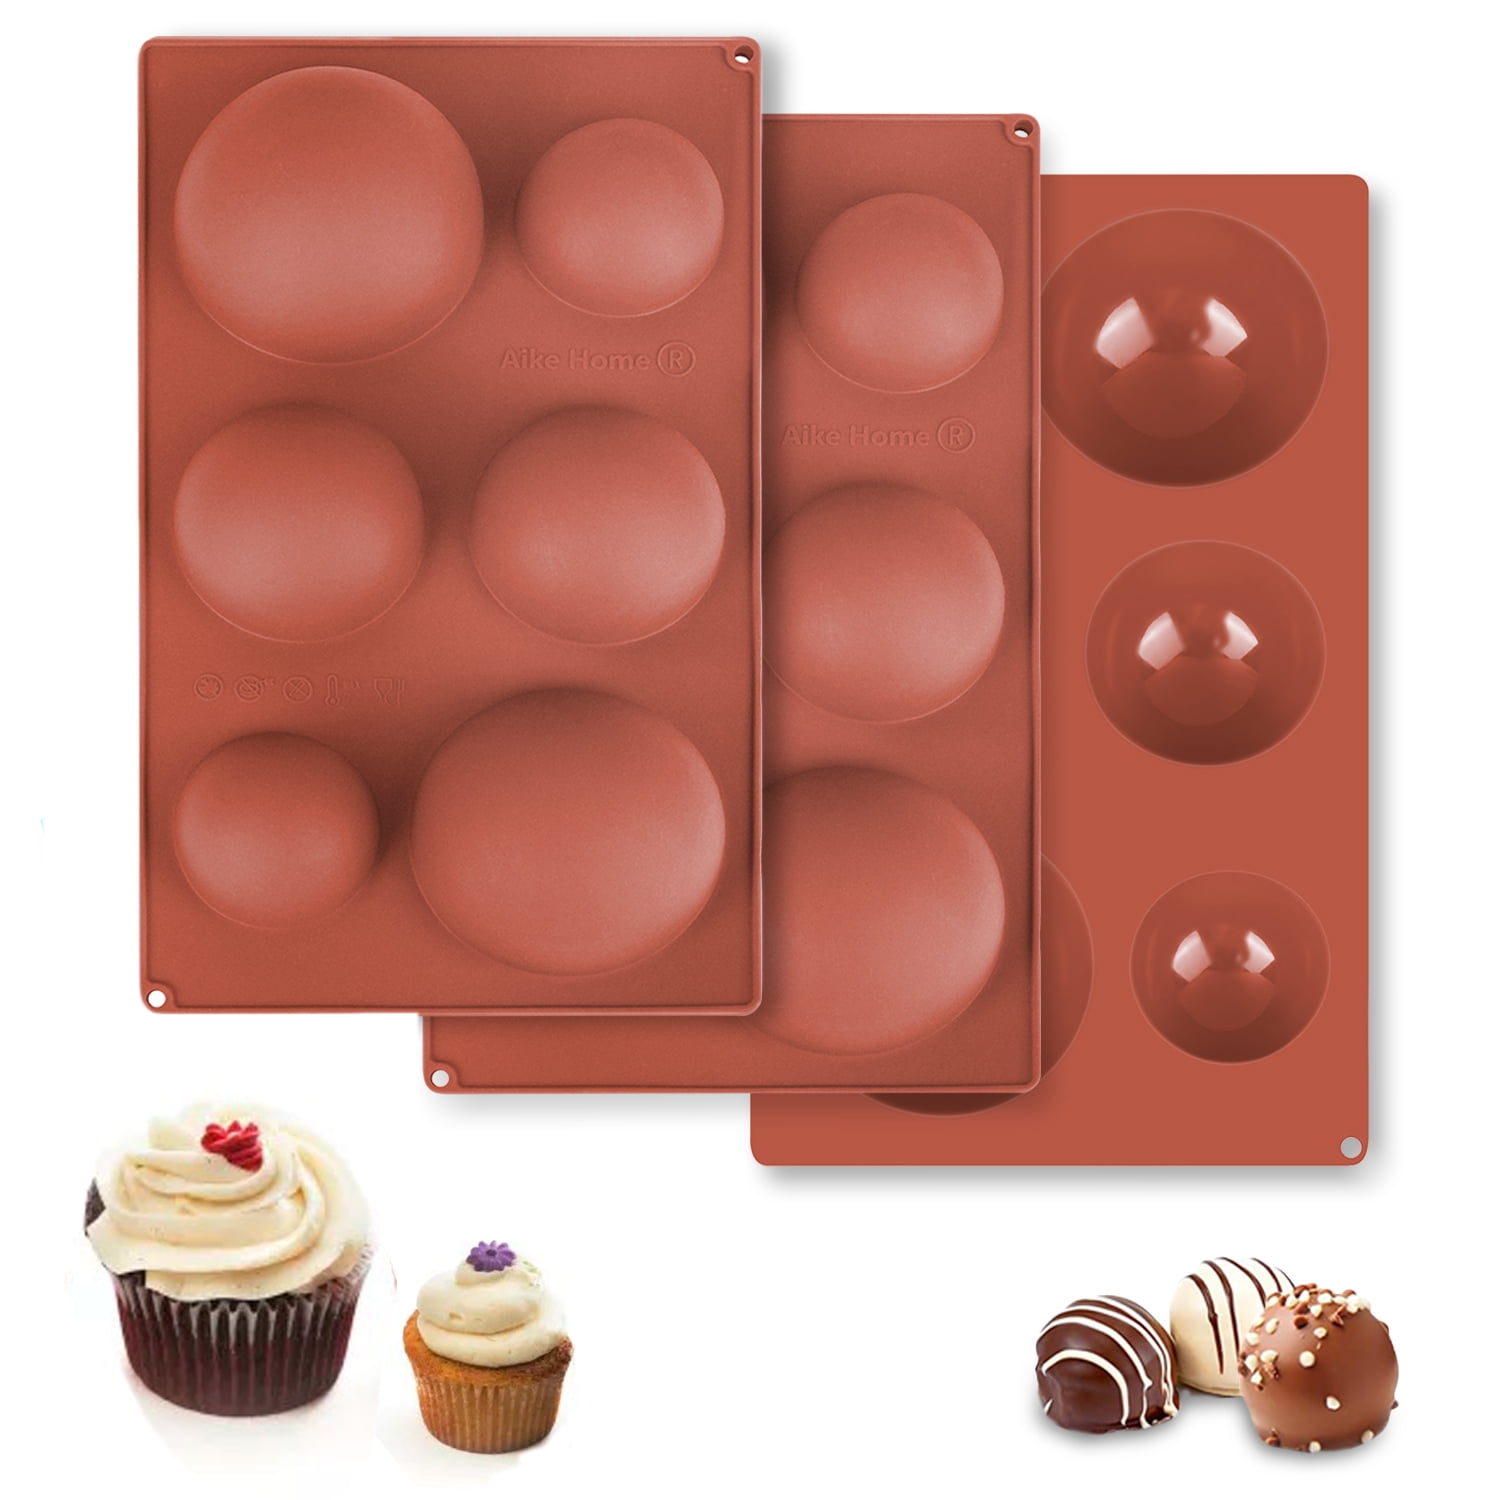 Details about   Tree Stumps Silicone Mold Fondant Mould Cake Decorating Tools Chocolate 2 Sizes 